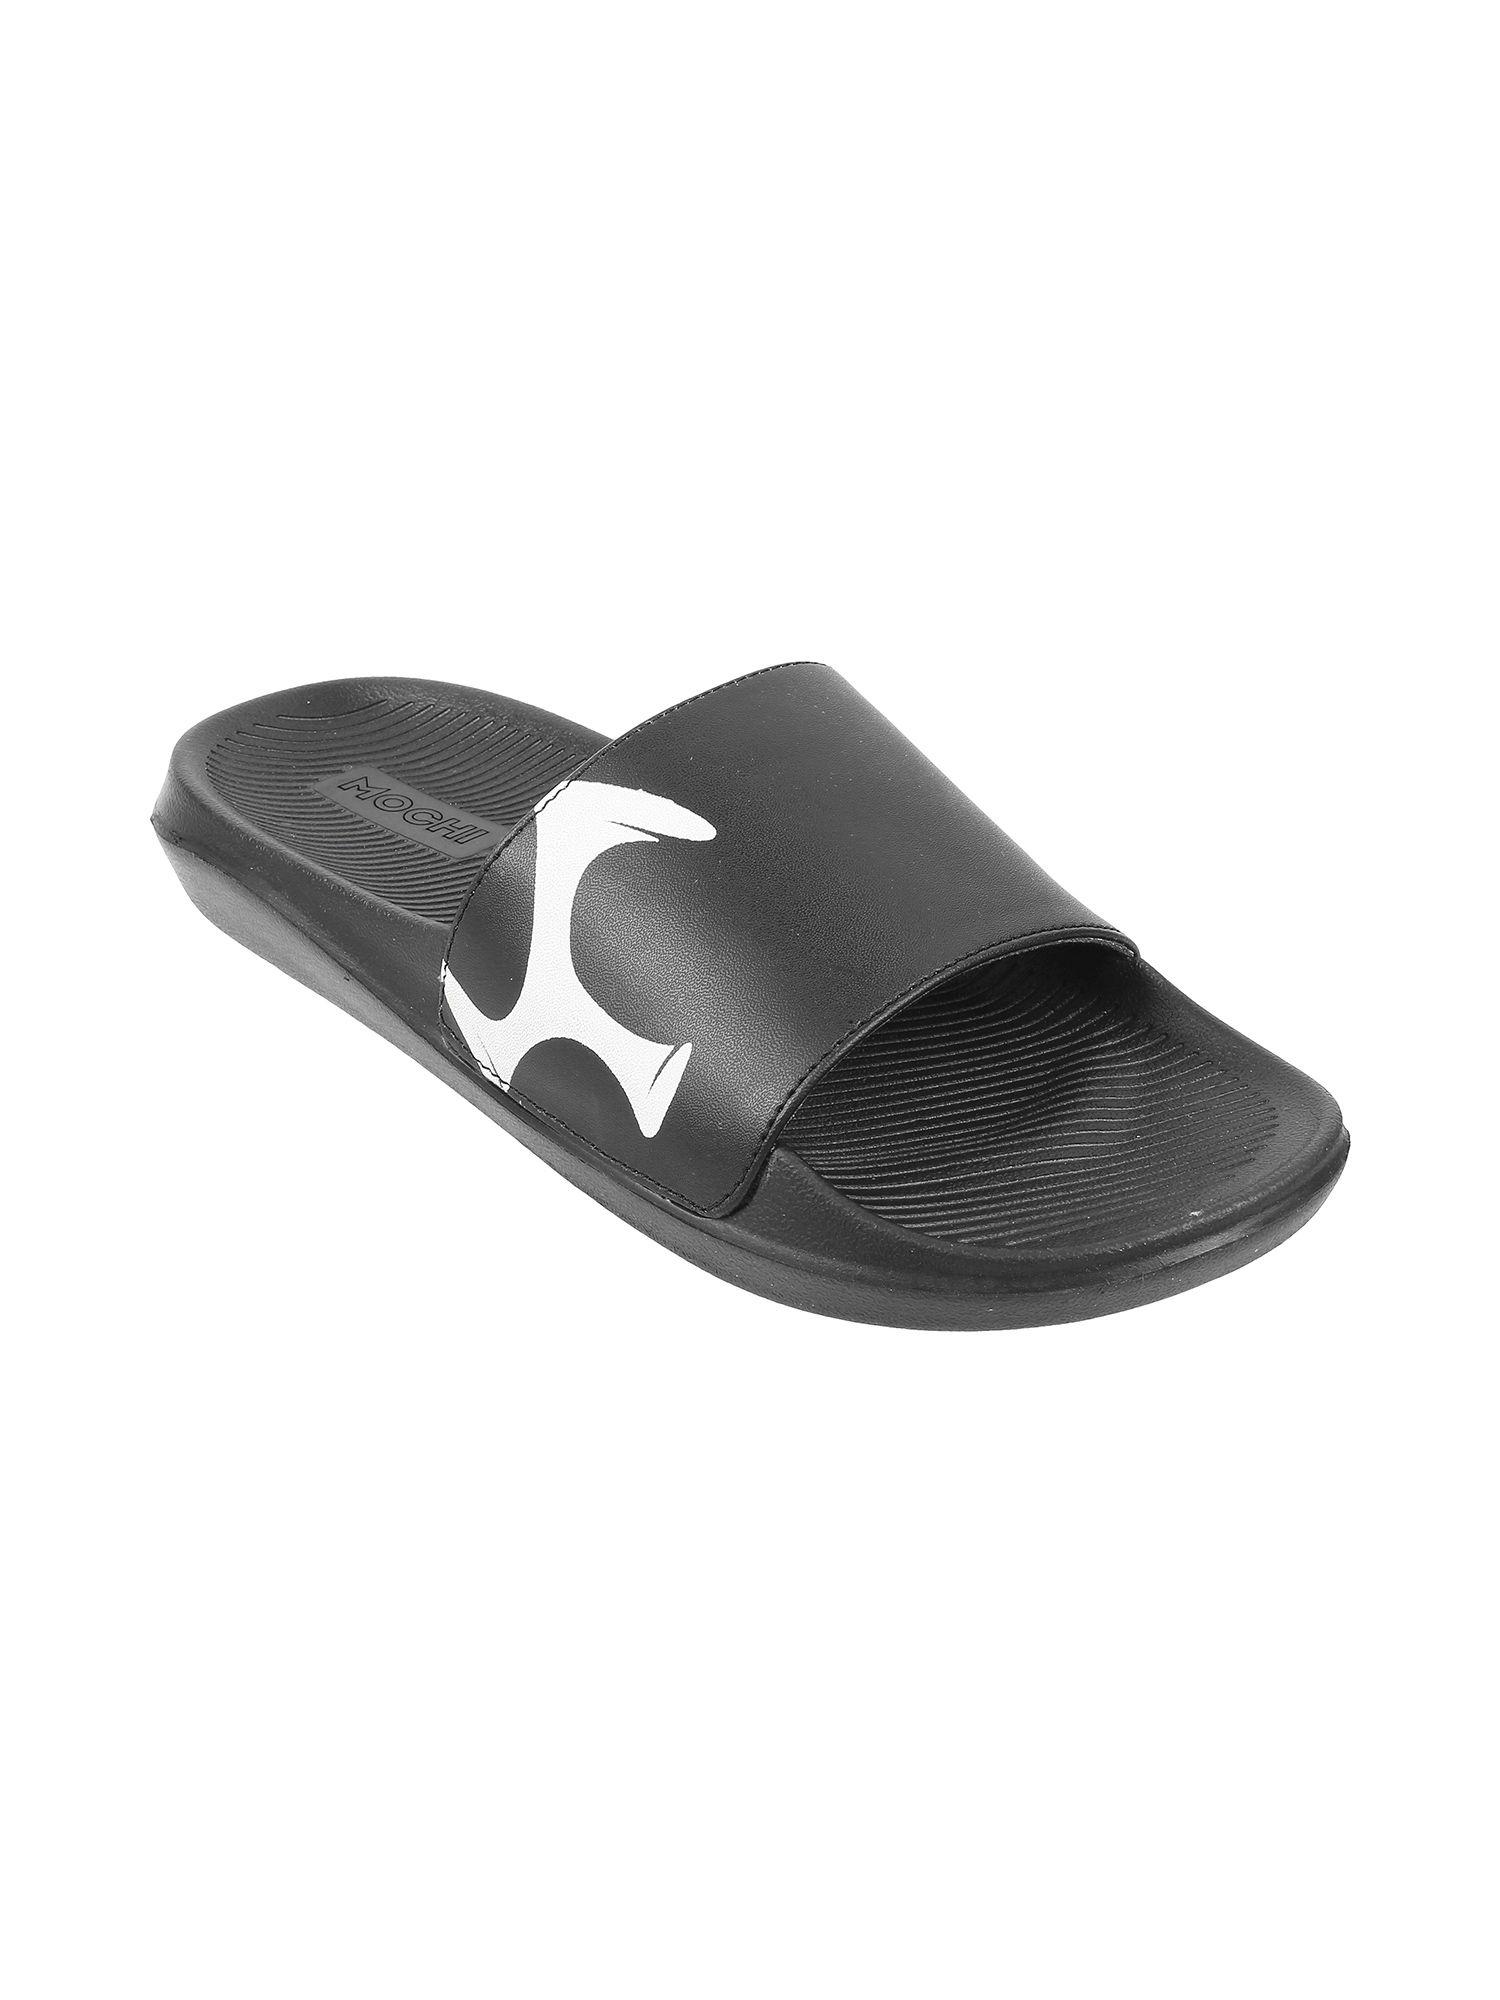 comfortable mens synthetic black sliders